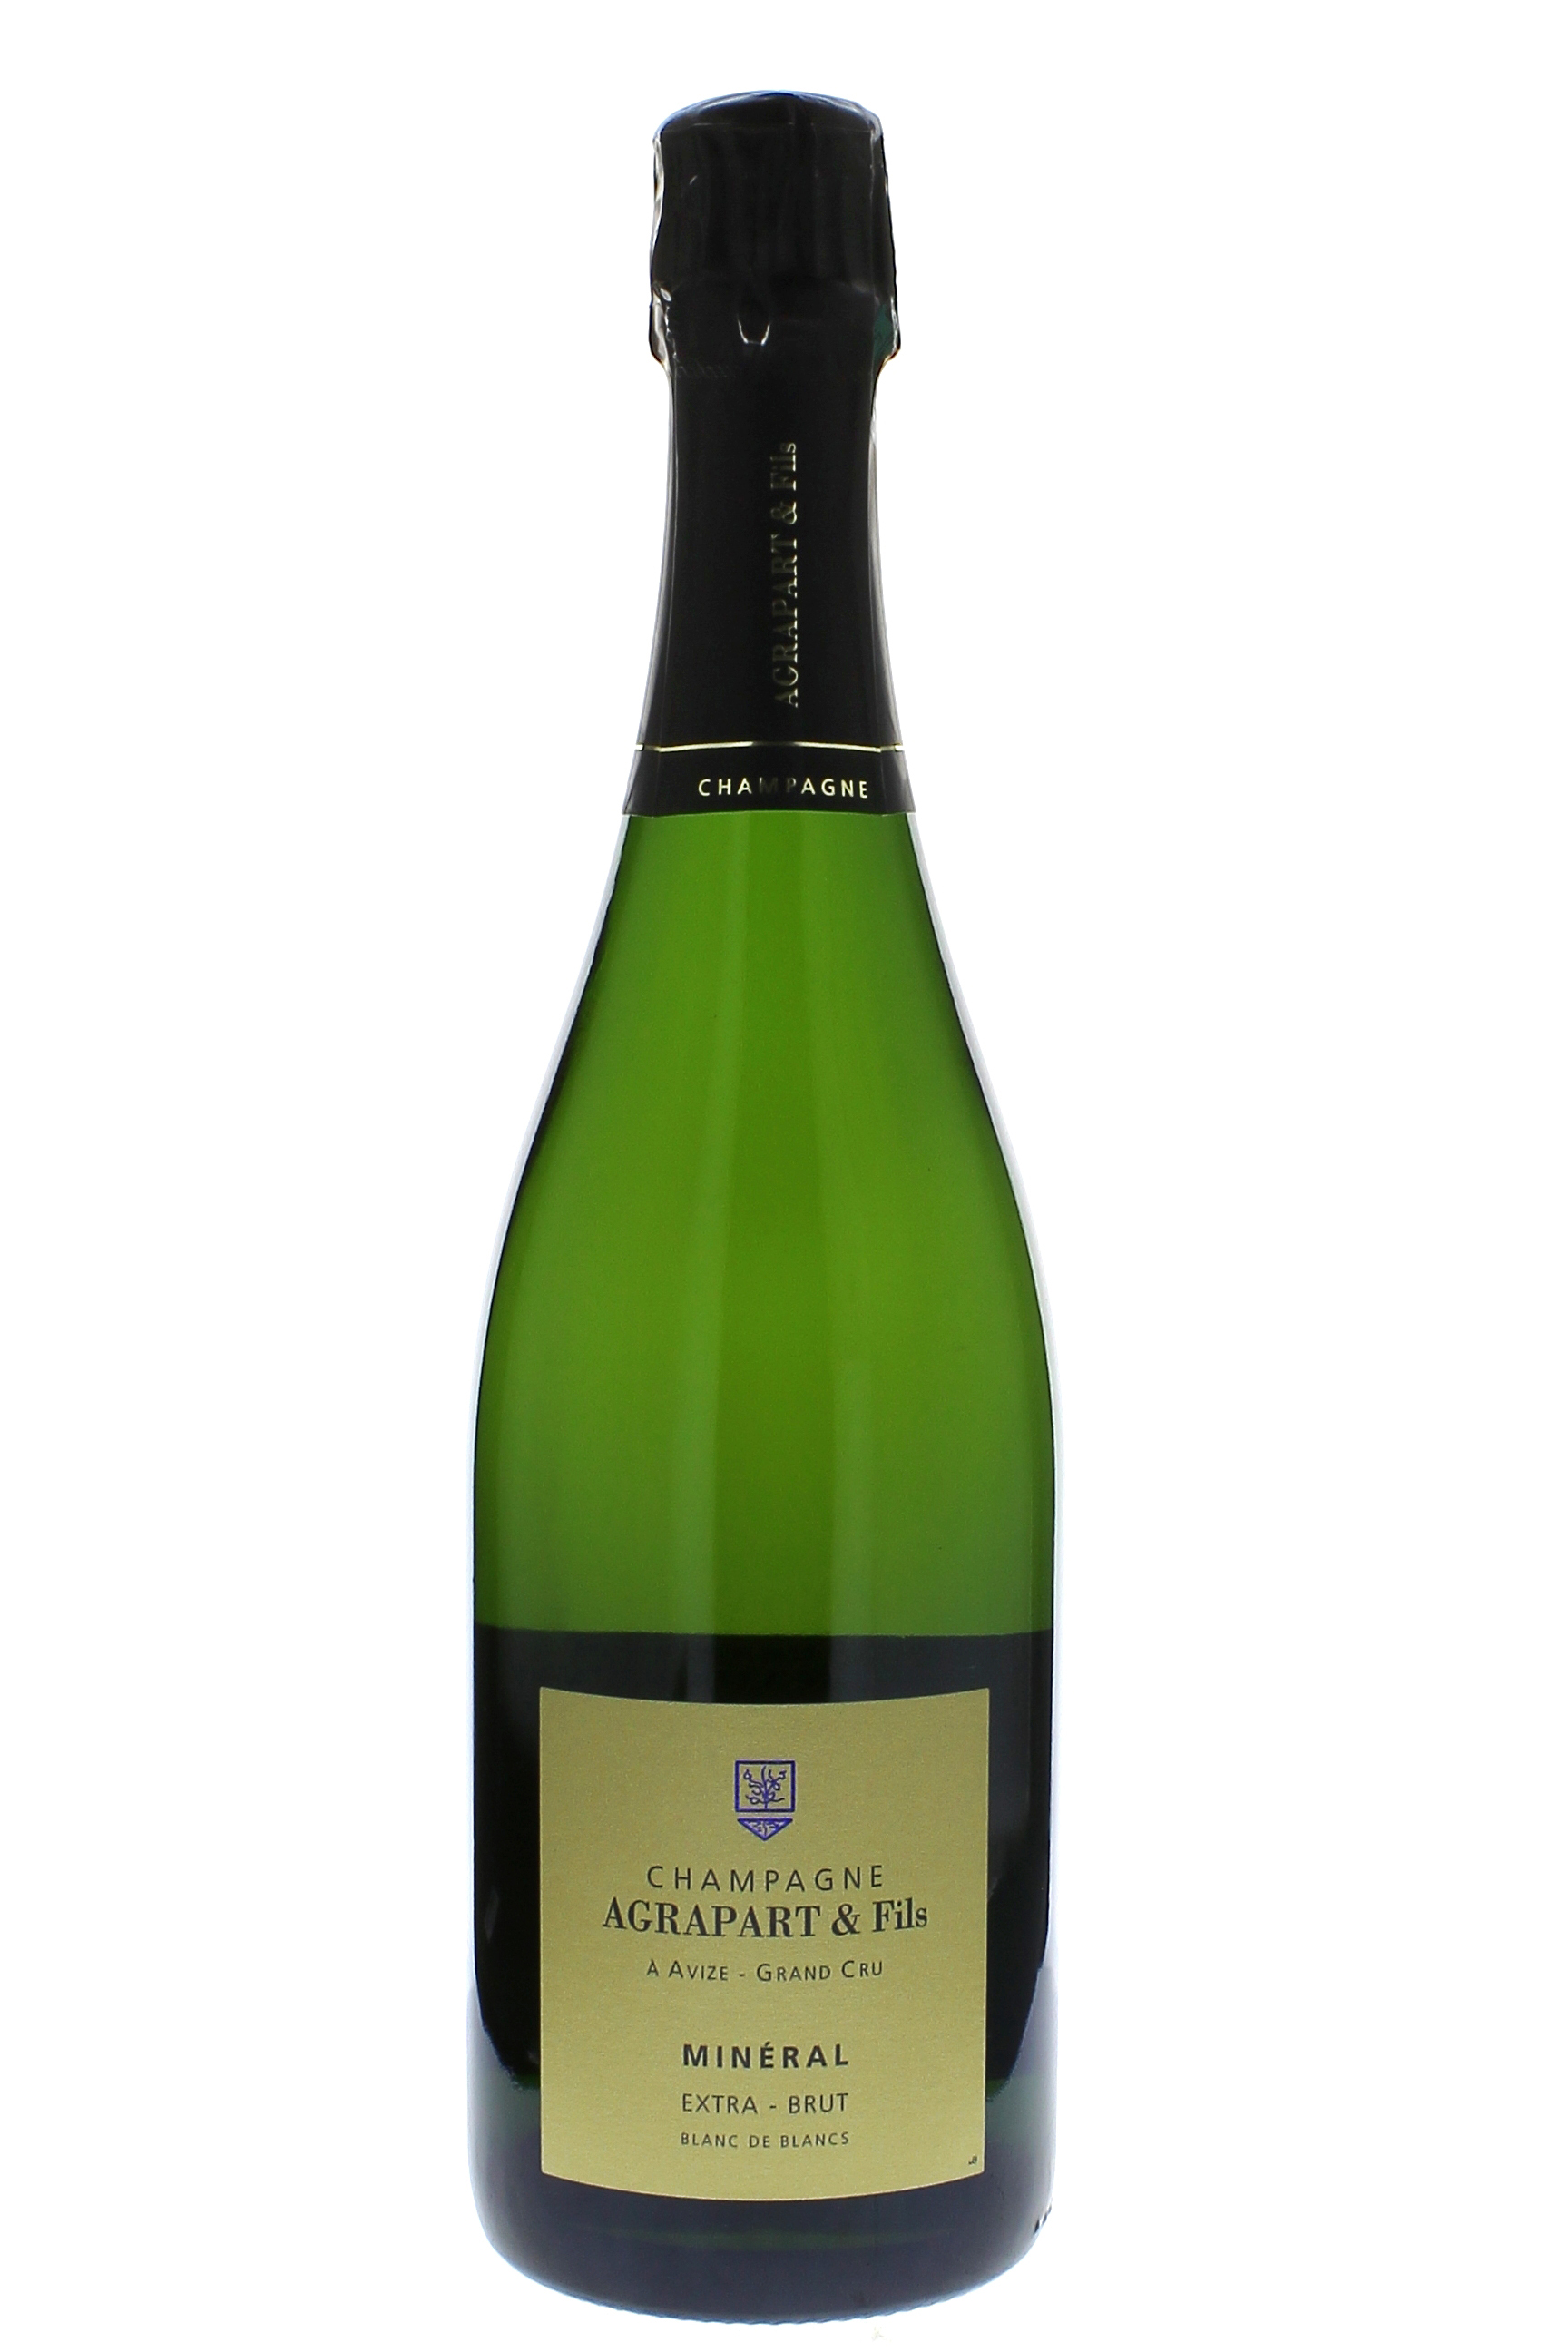 Agrapart  mineral extra brut 2007  Champagne, Agrapart